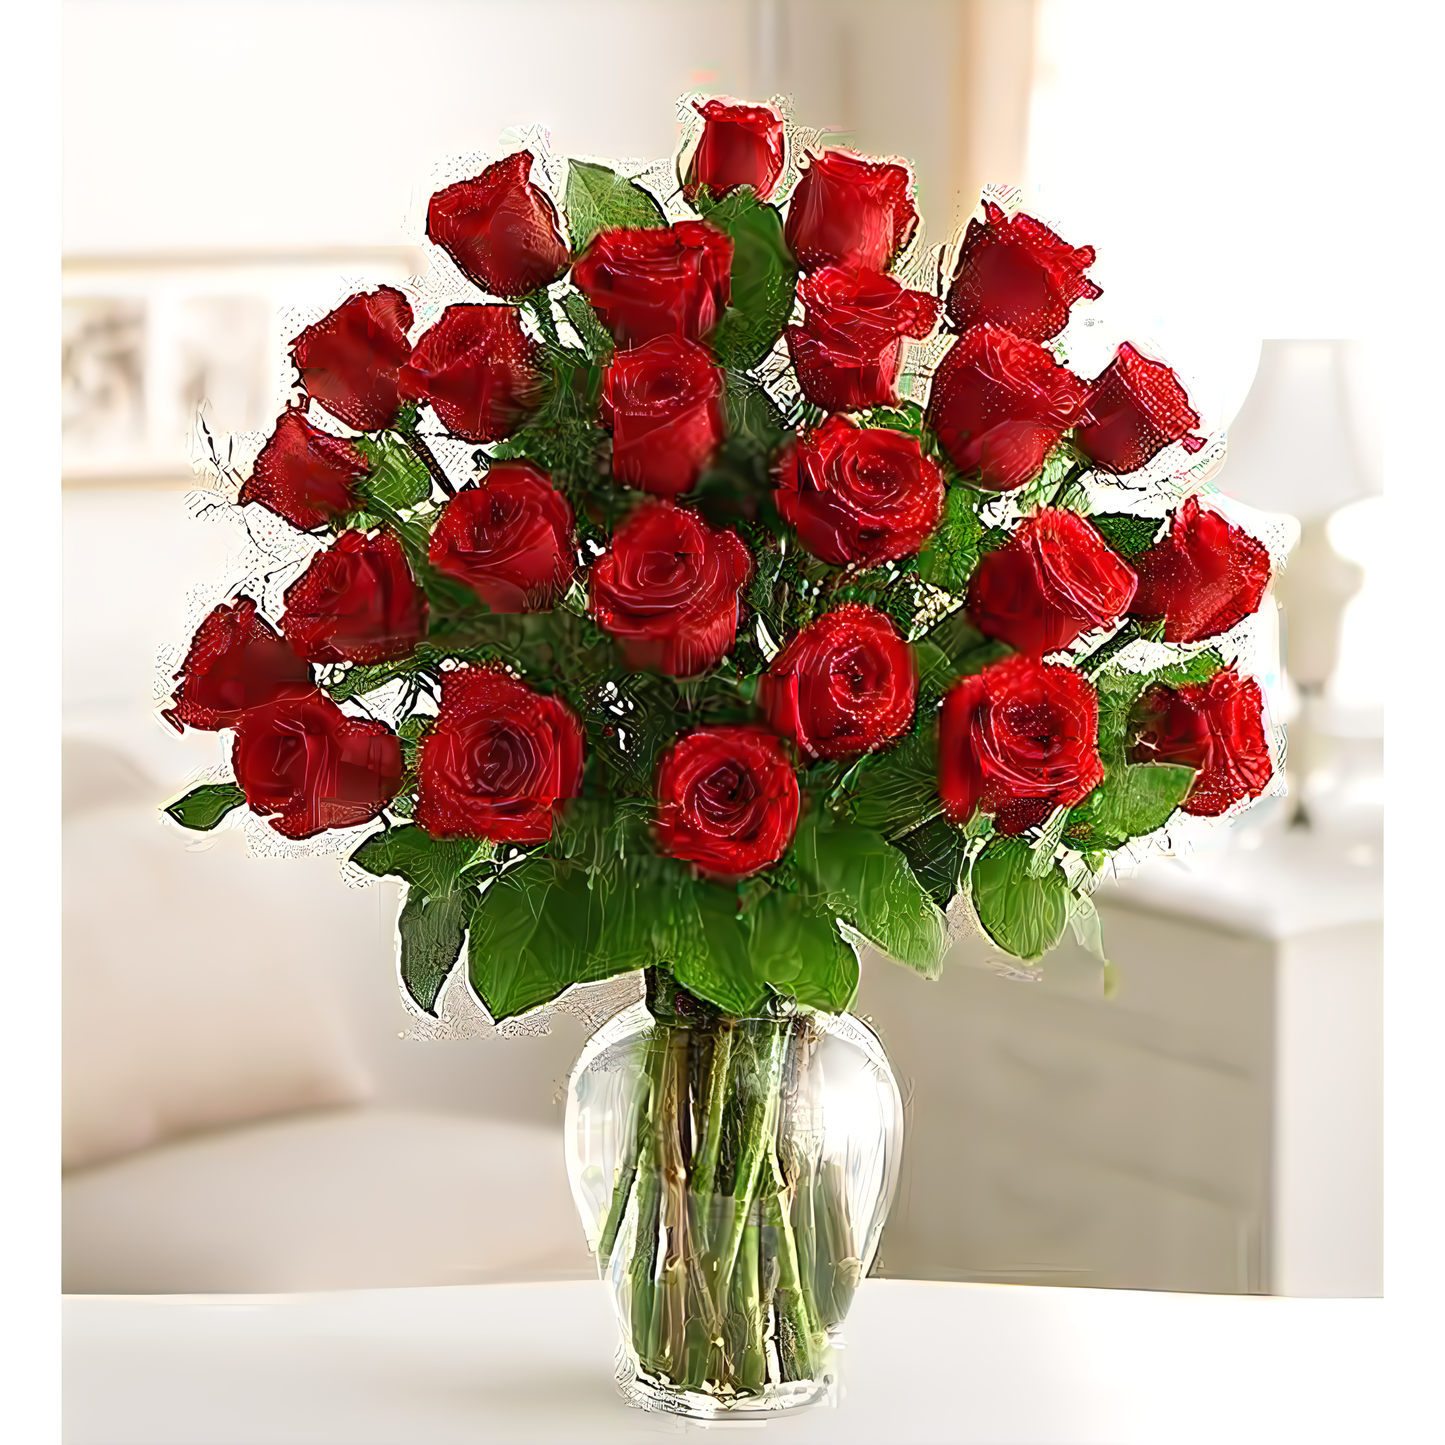 NYC Flower Delivery - Two Dozen Roses for Sympathy - Funeral > For the Service